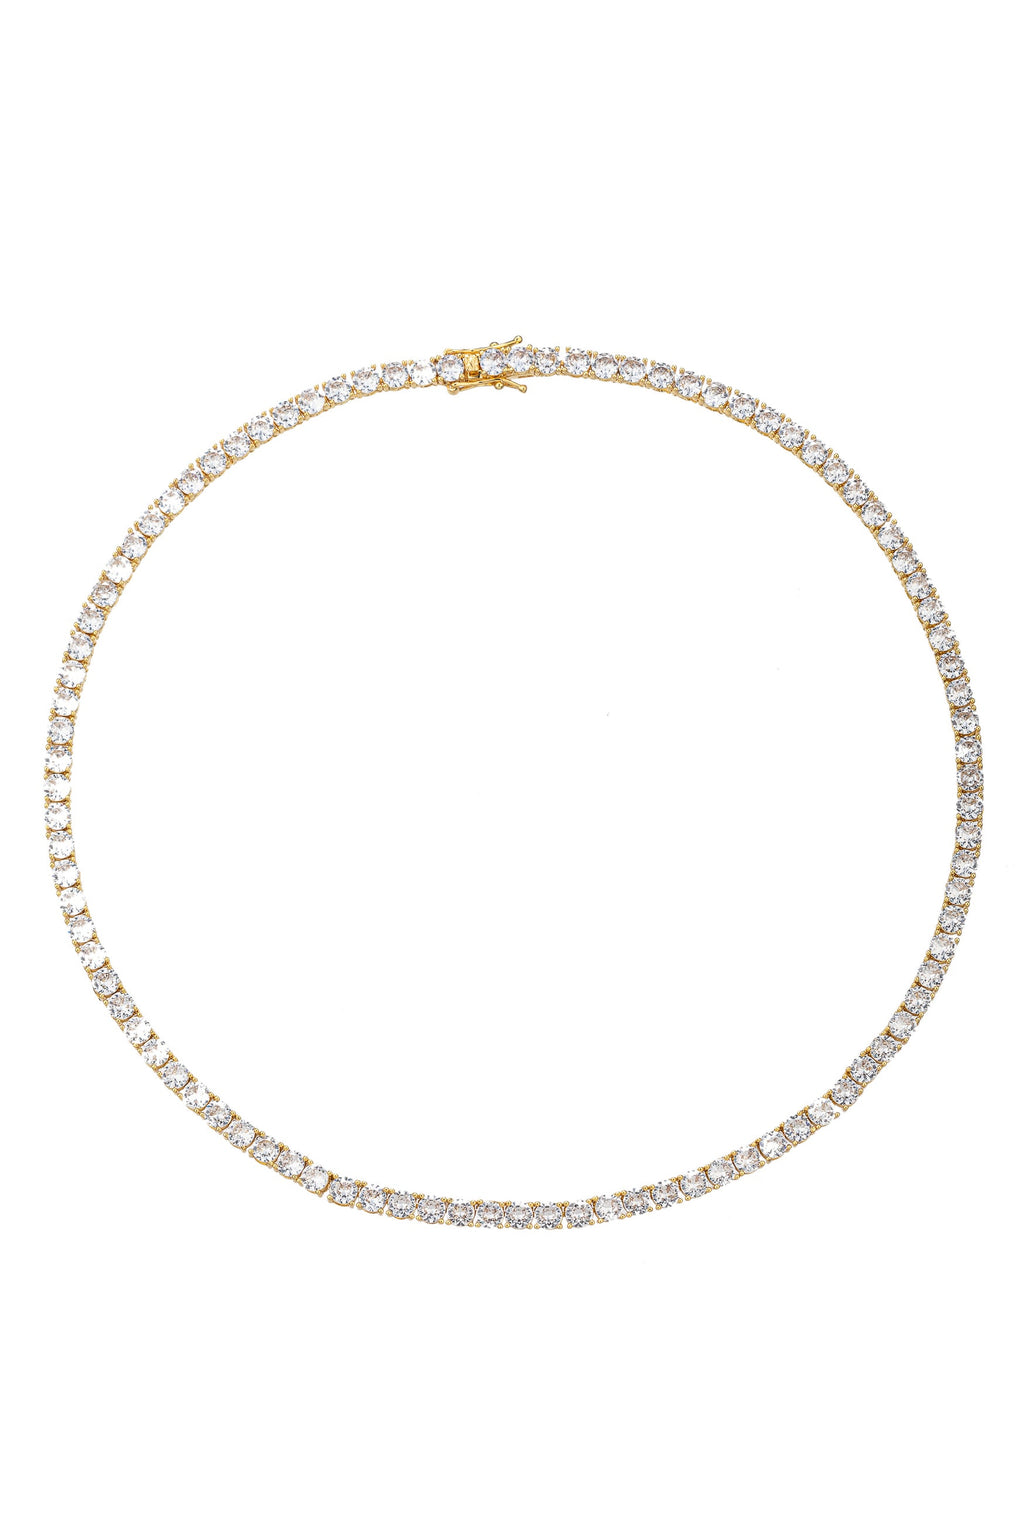 Lincoln 14 Drop CZ Tennis Necklace: Dazzle Your Look with Timeless Elegance."